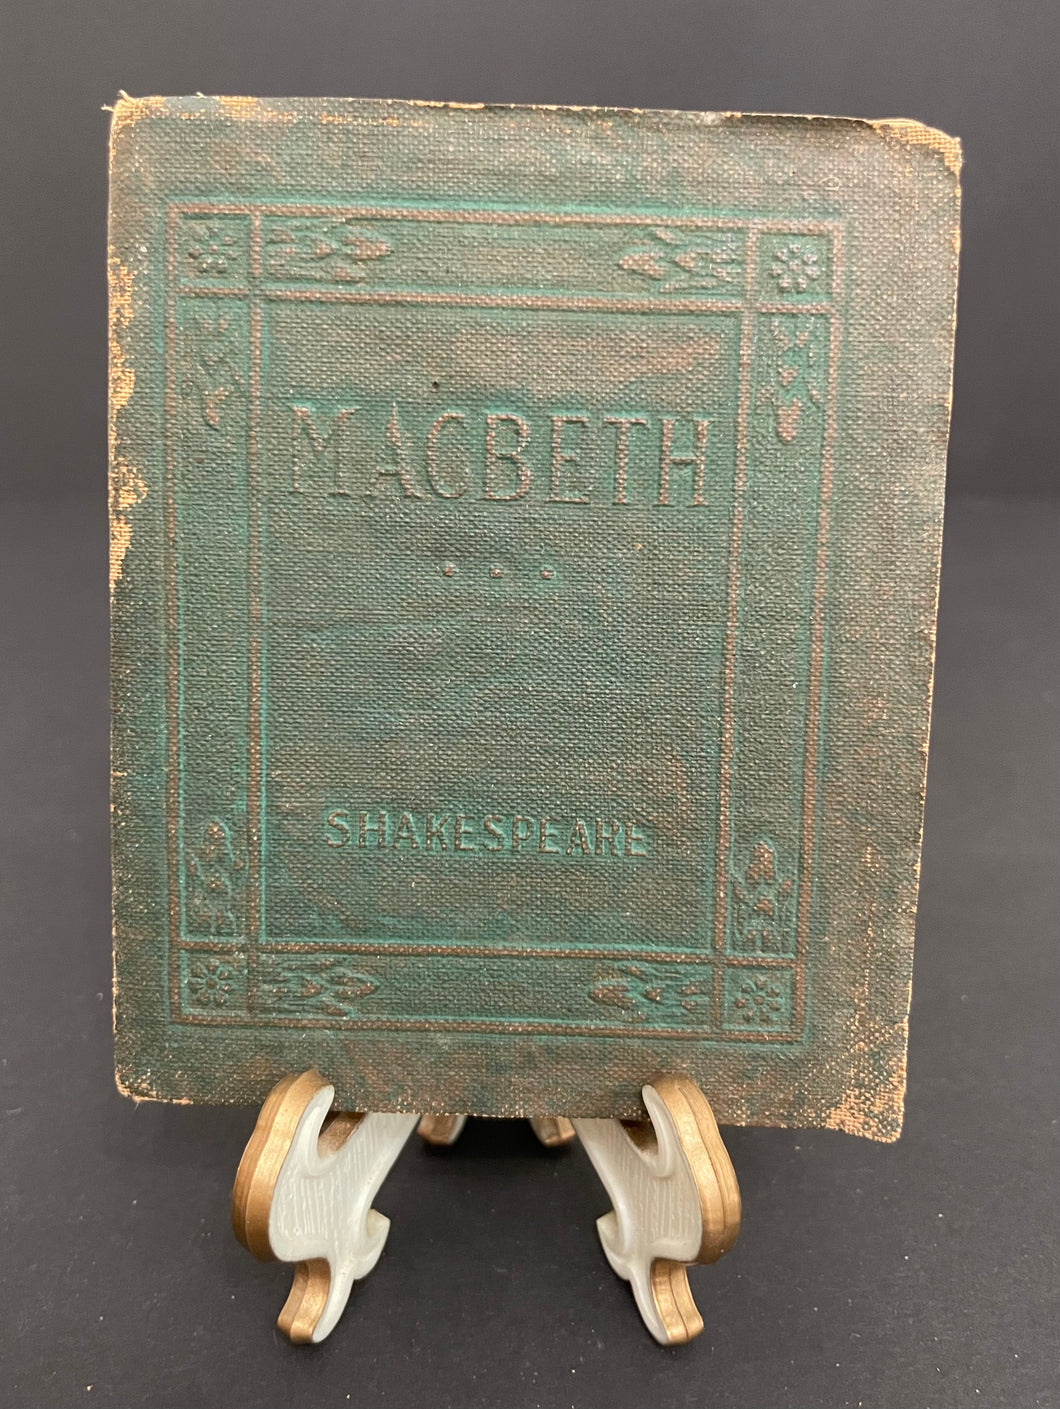 Antique Little Leather Library “Macbeth” by Shakespeare Book